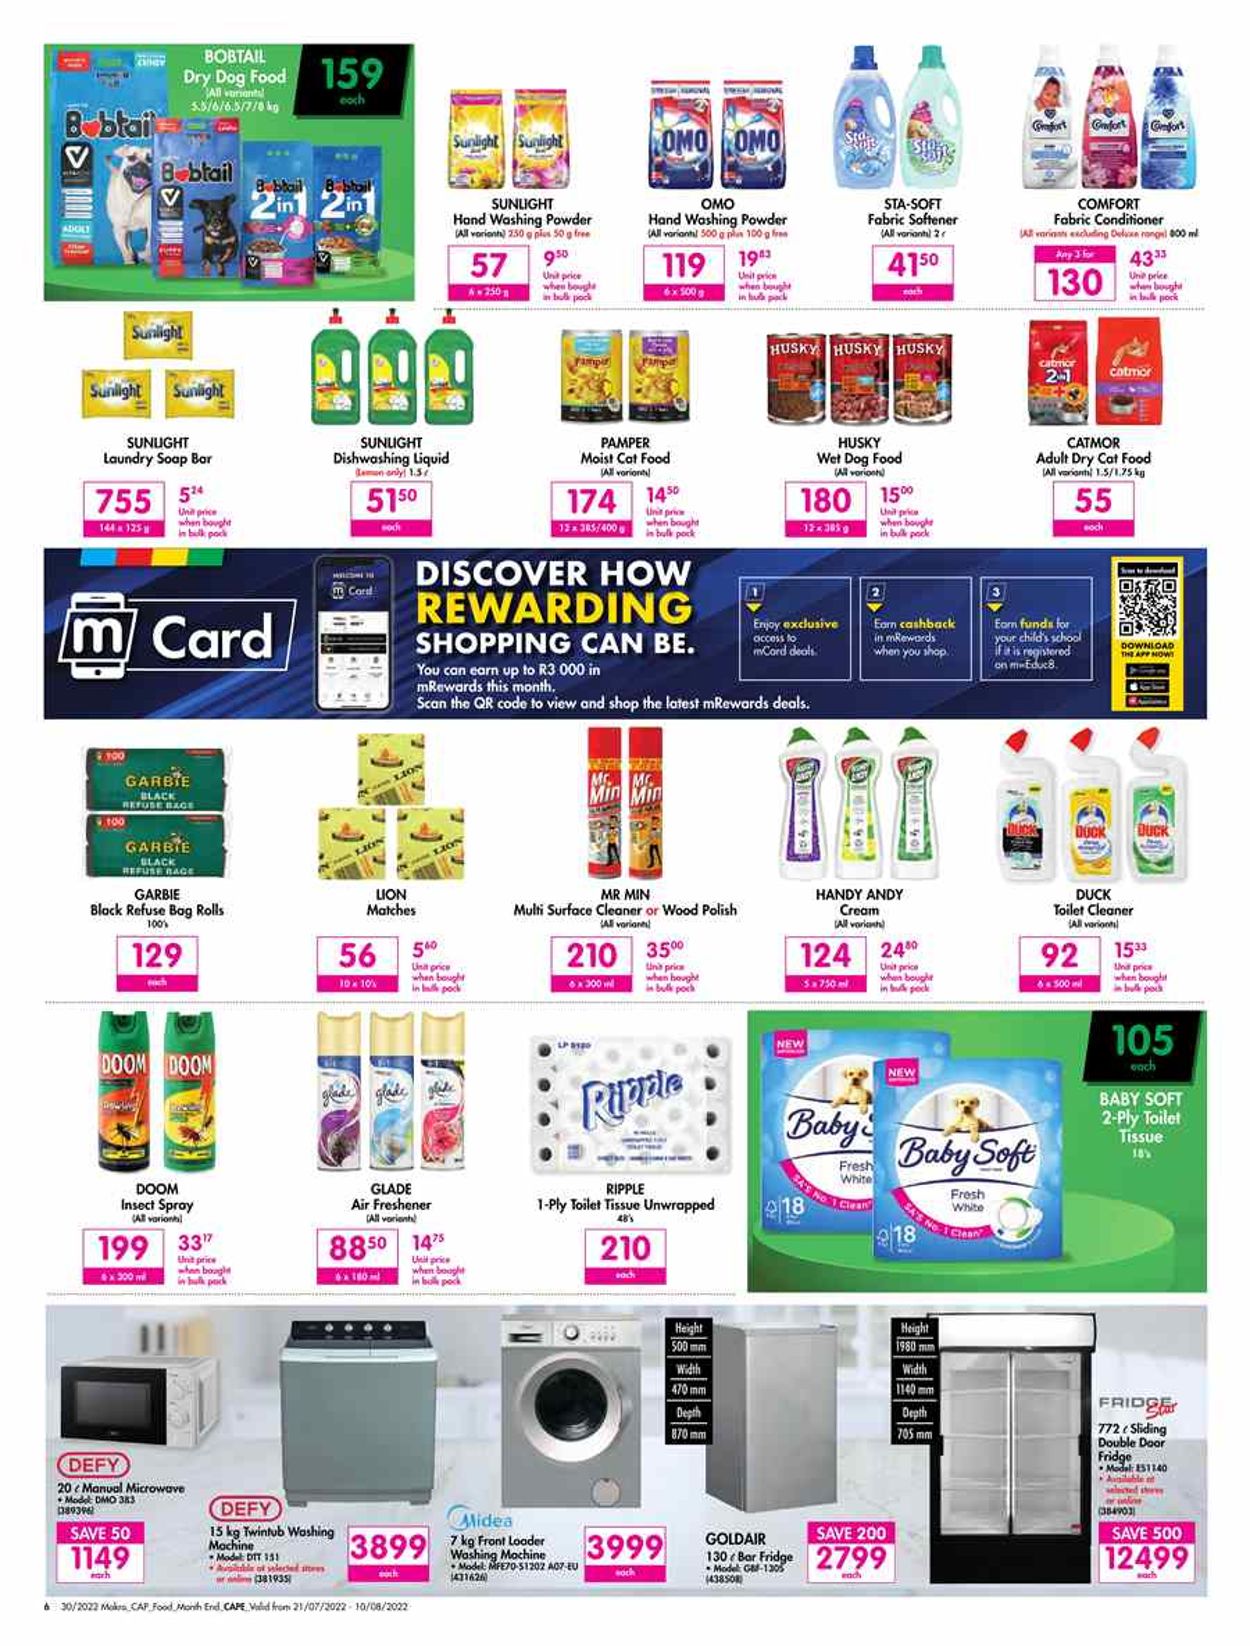 Makro Catalogue from 2022/07/21